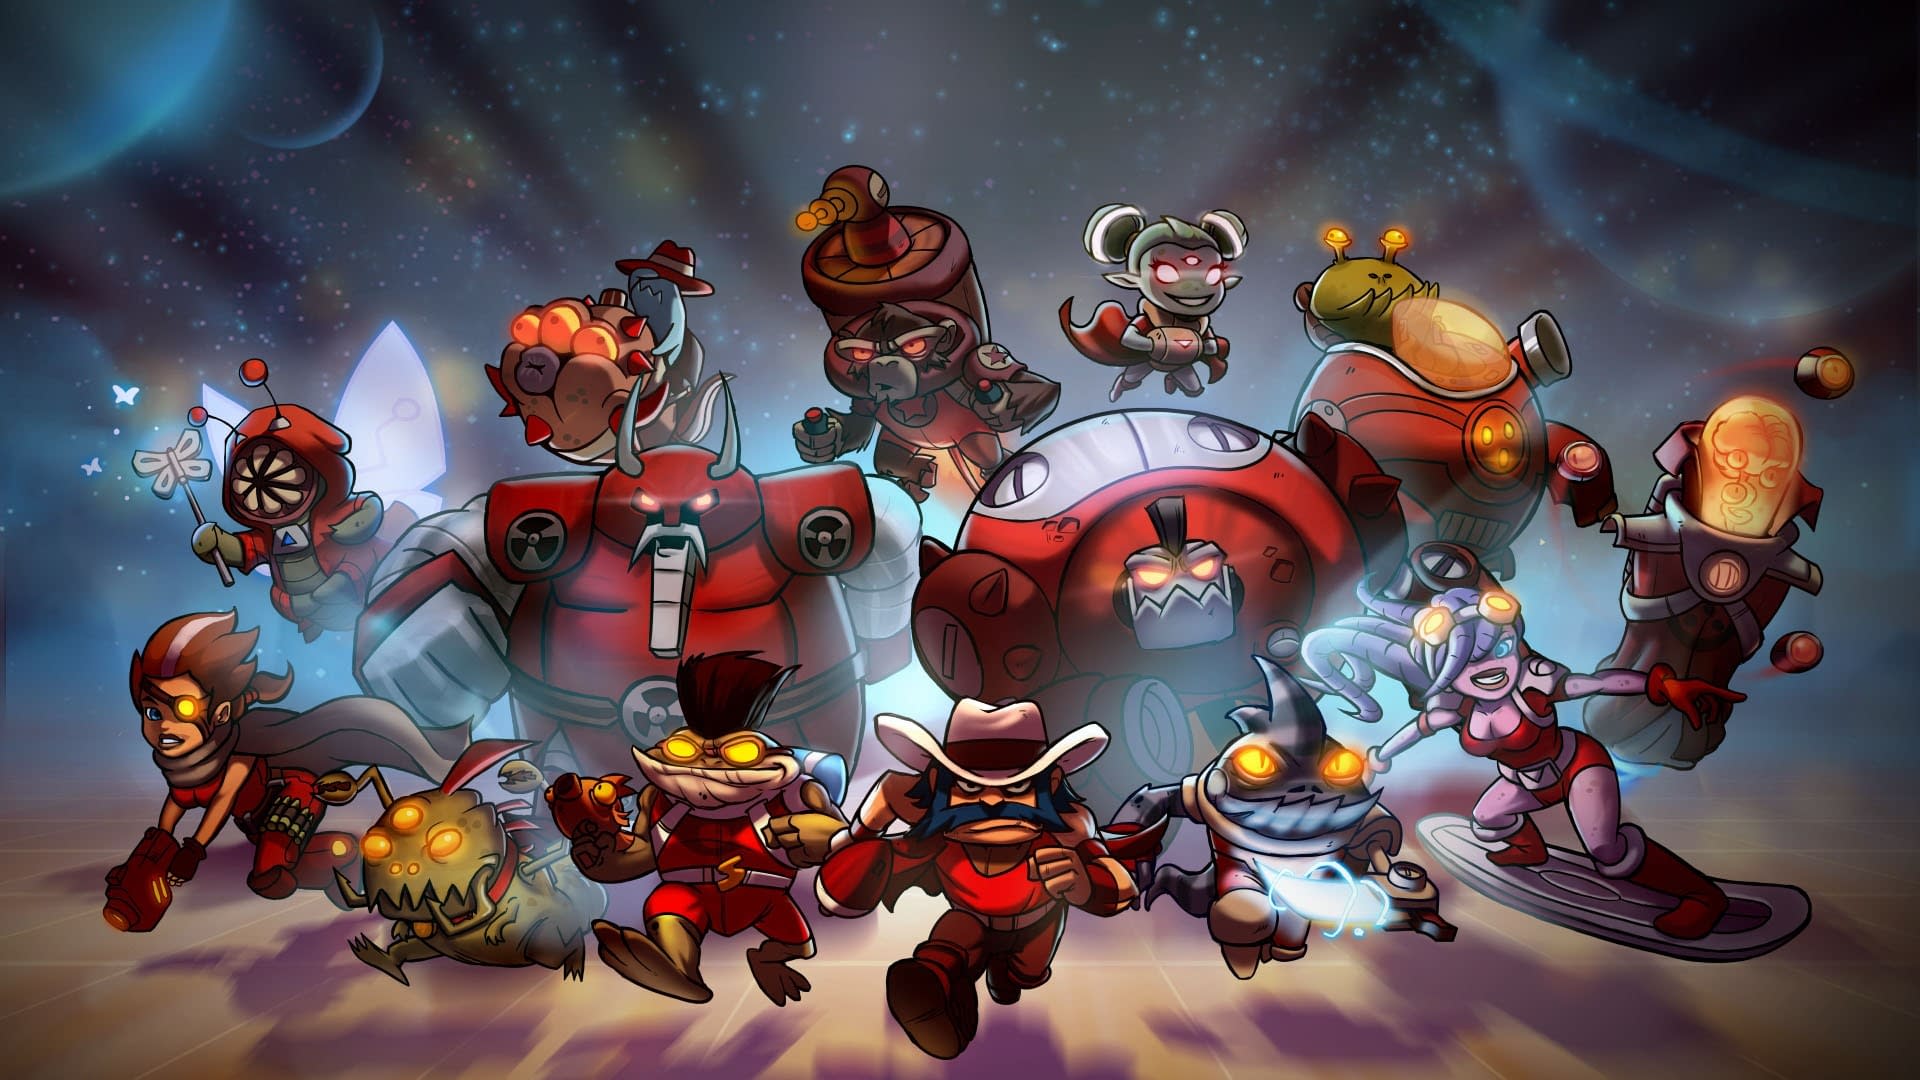 Awesomenauts: Characters, Tips and Tactics